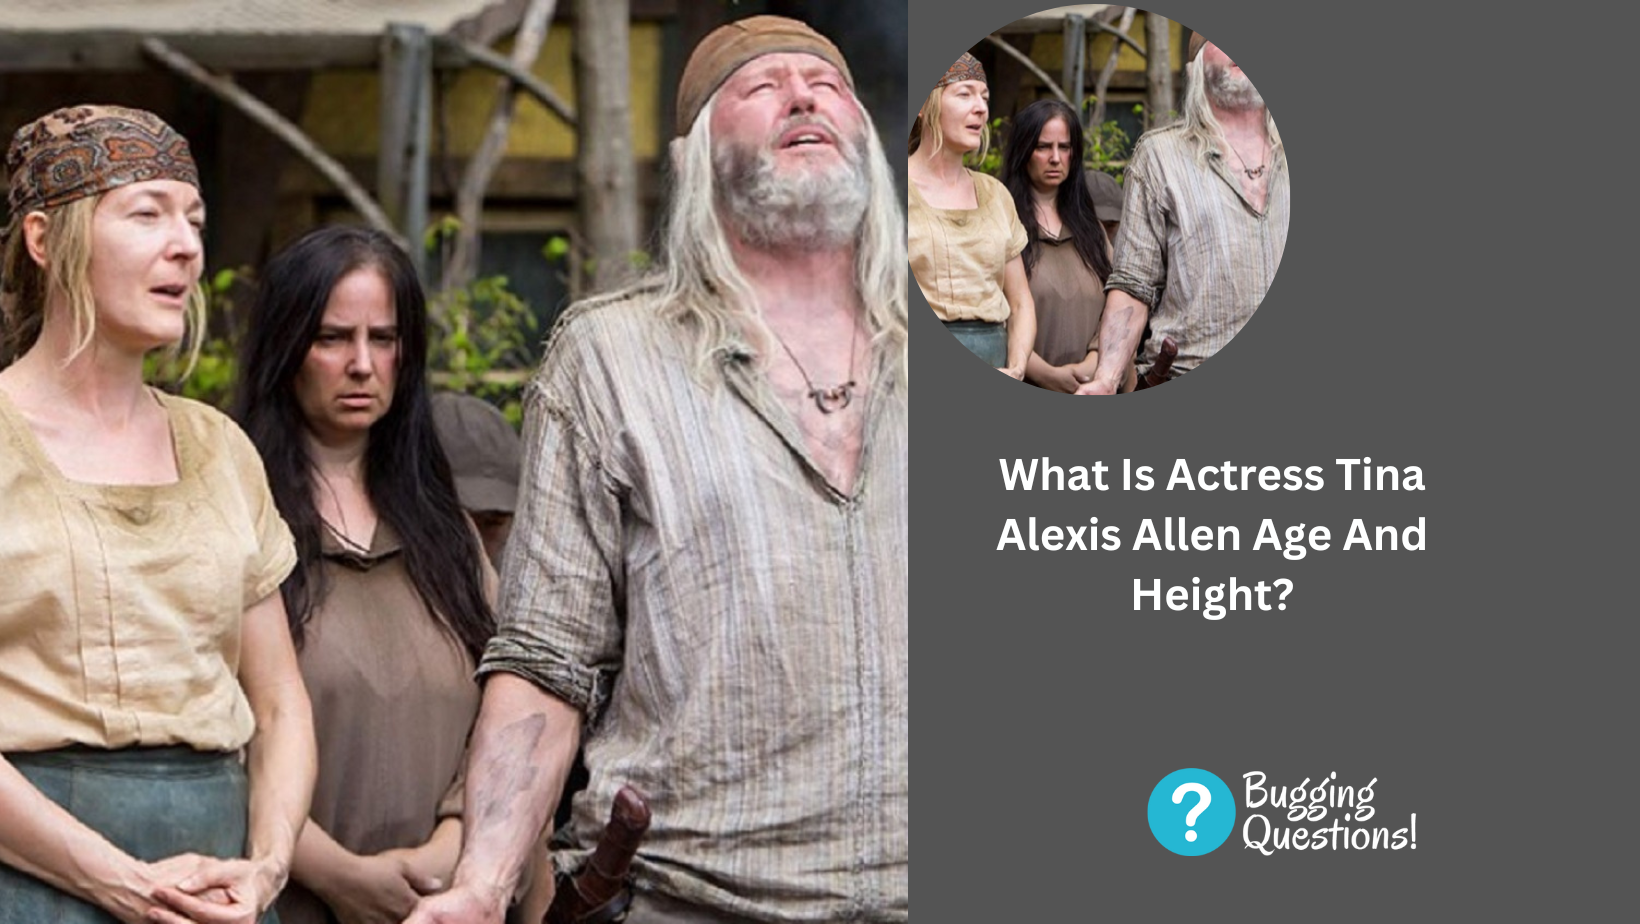 What Is Actress Tina Alexis Allen Age And Height?